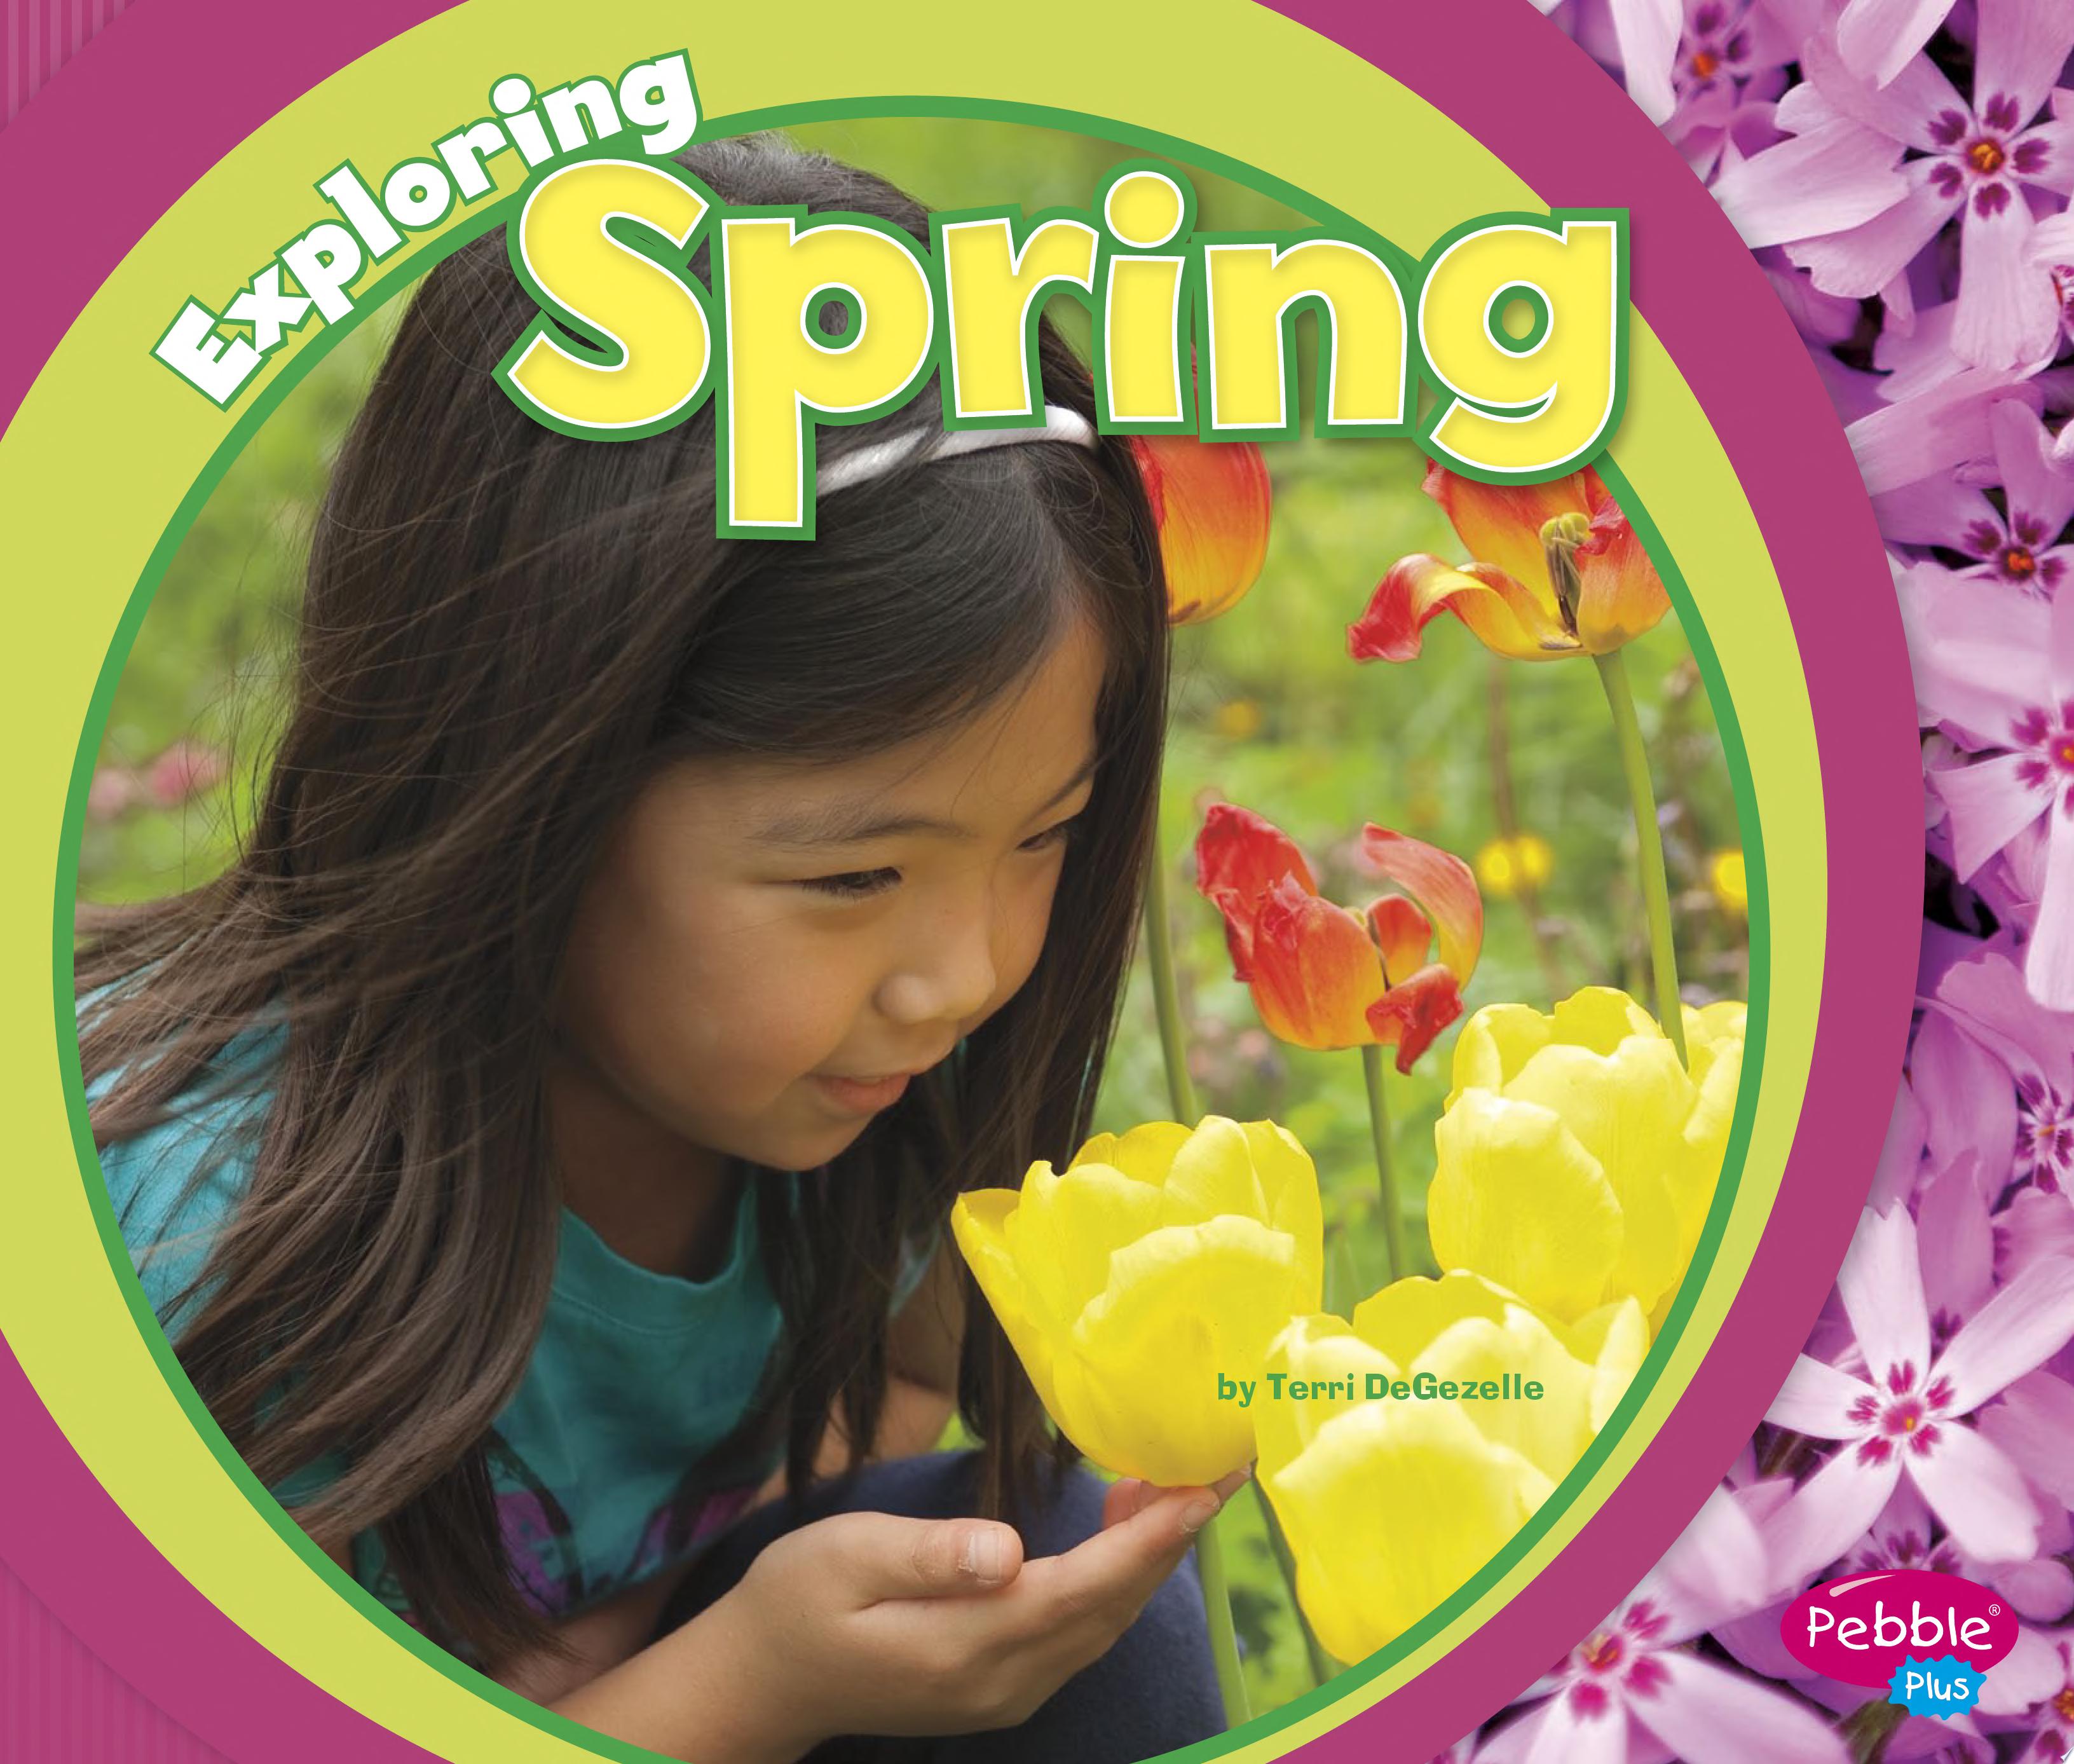 Image for "Exploring Spring"